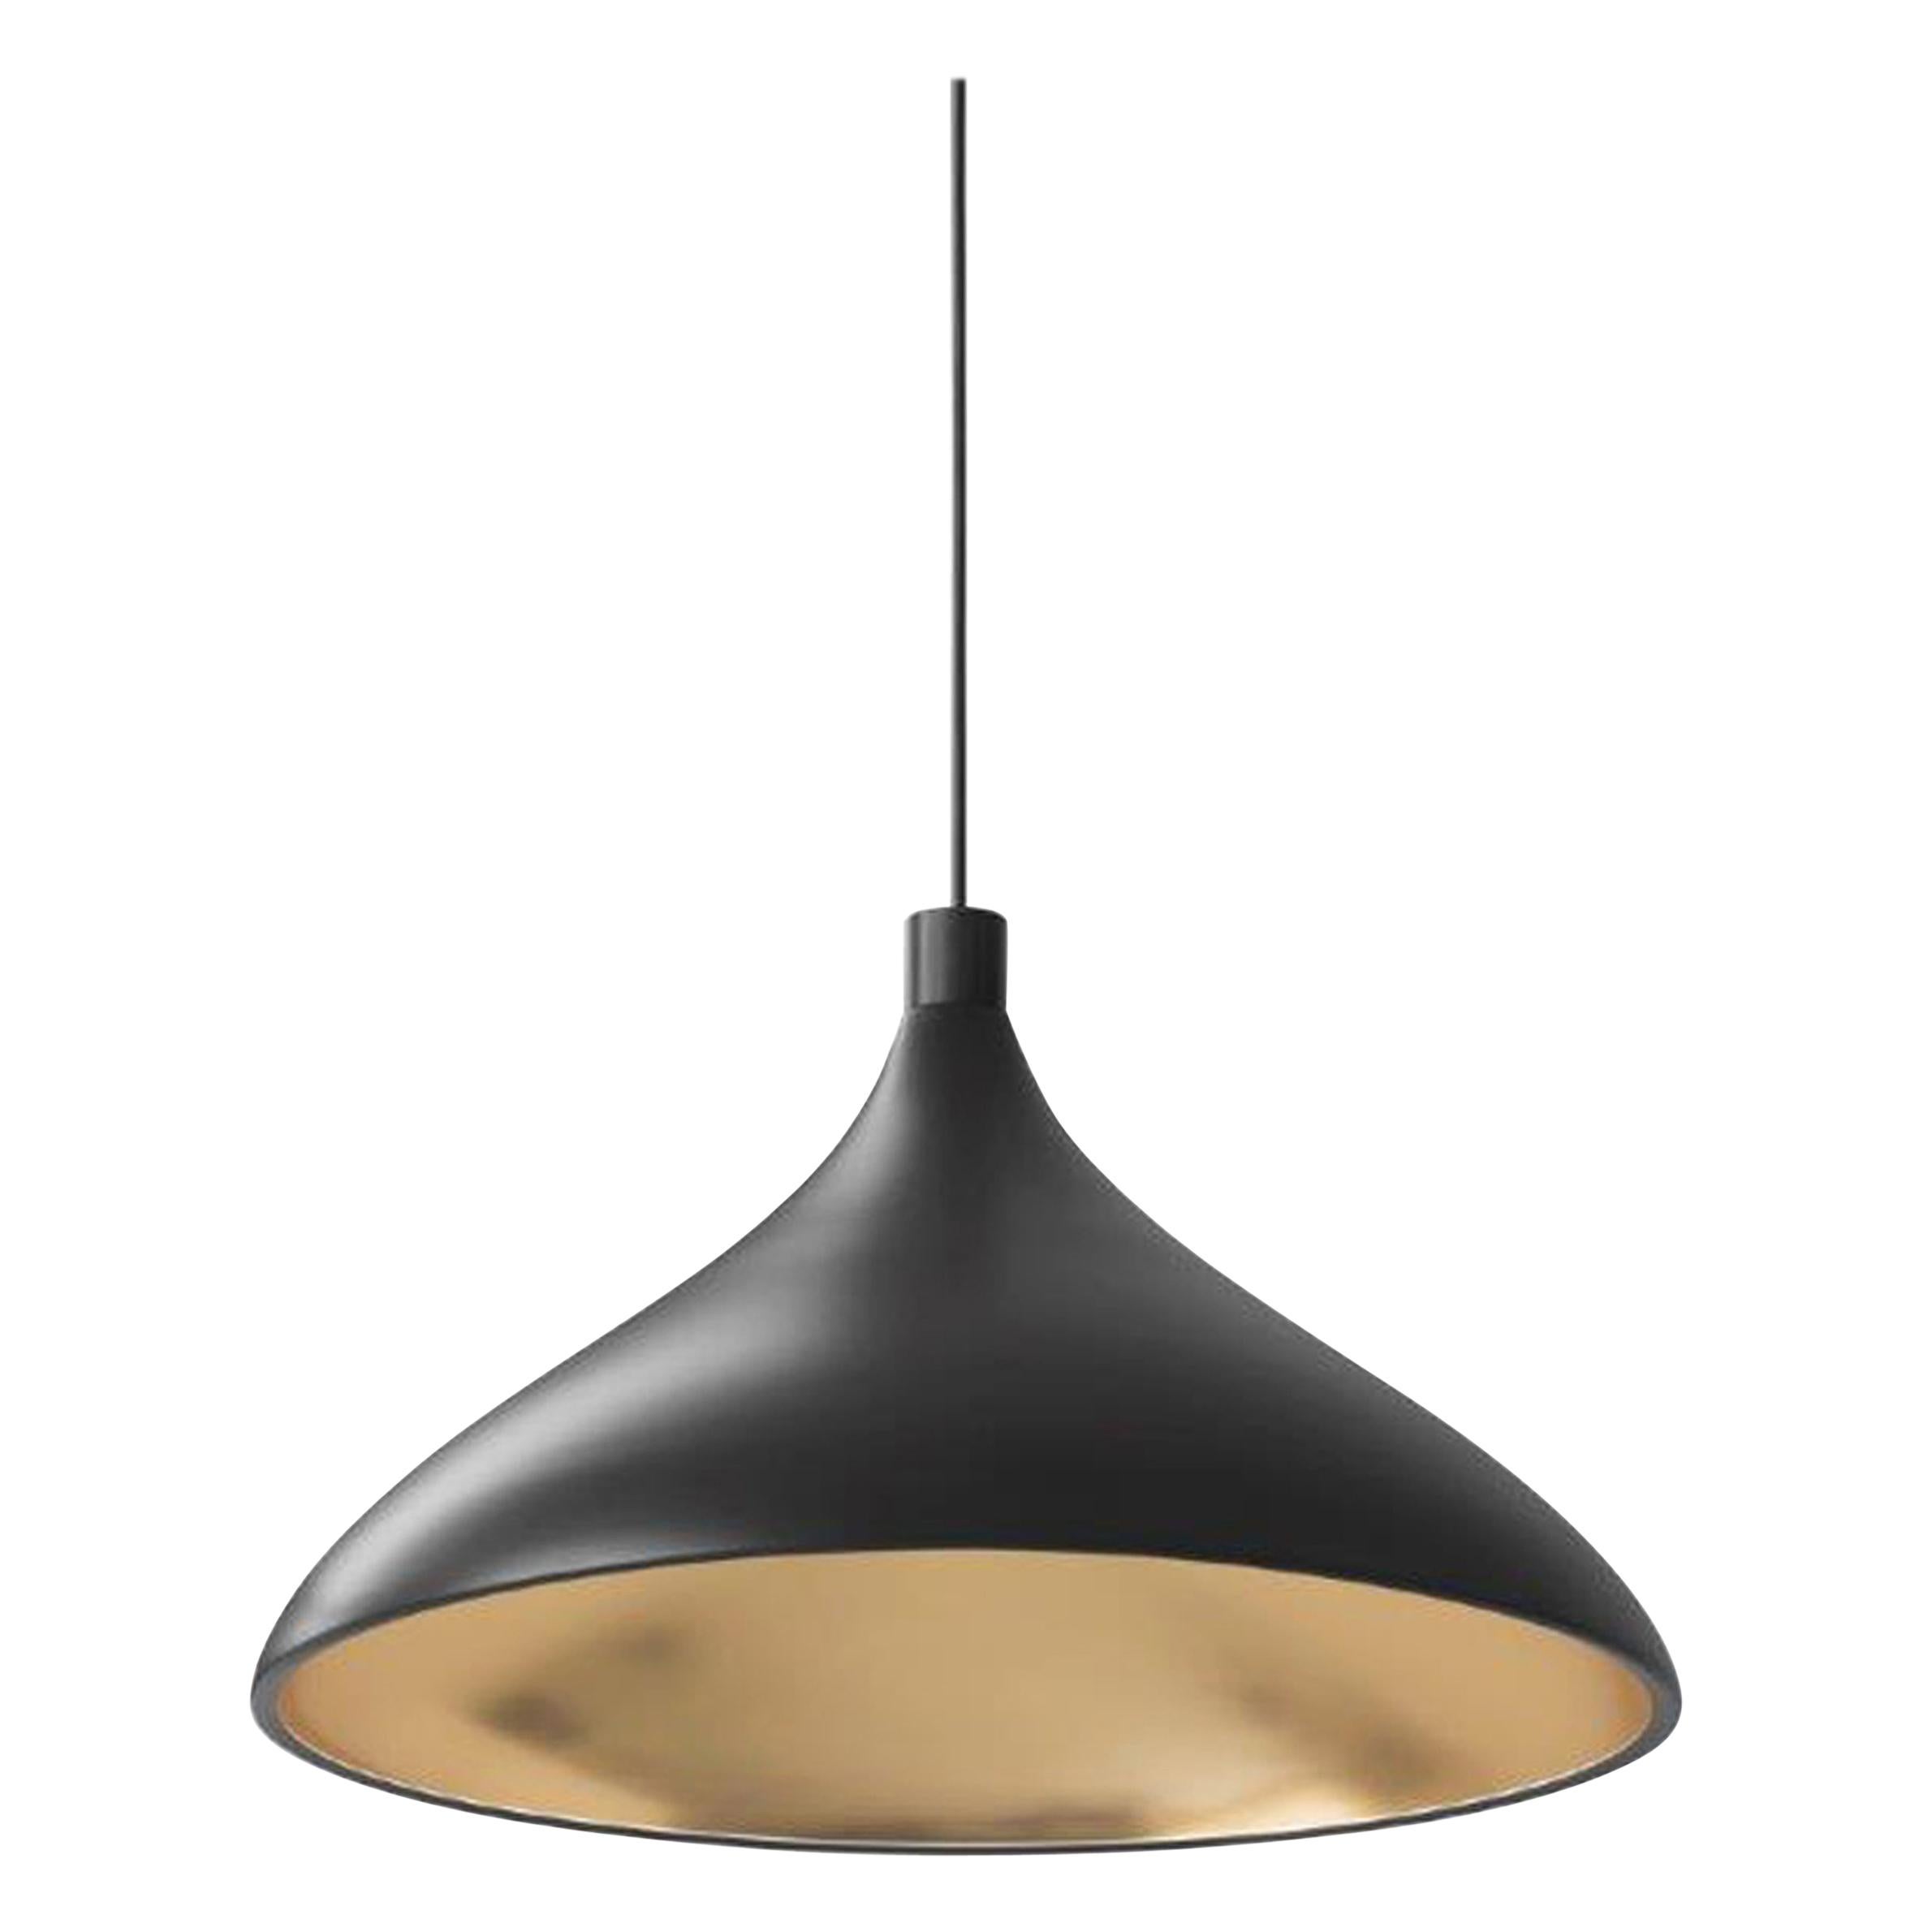 Swell XL Single Wide LED Pendant Lamp in Black and Brass by Pablo Designs For Sale